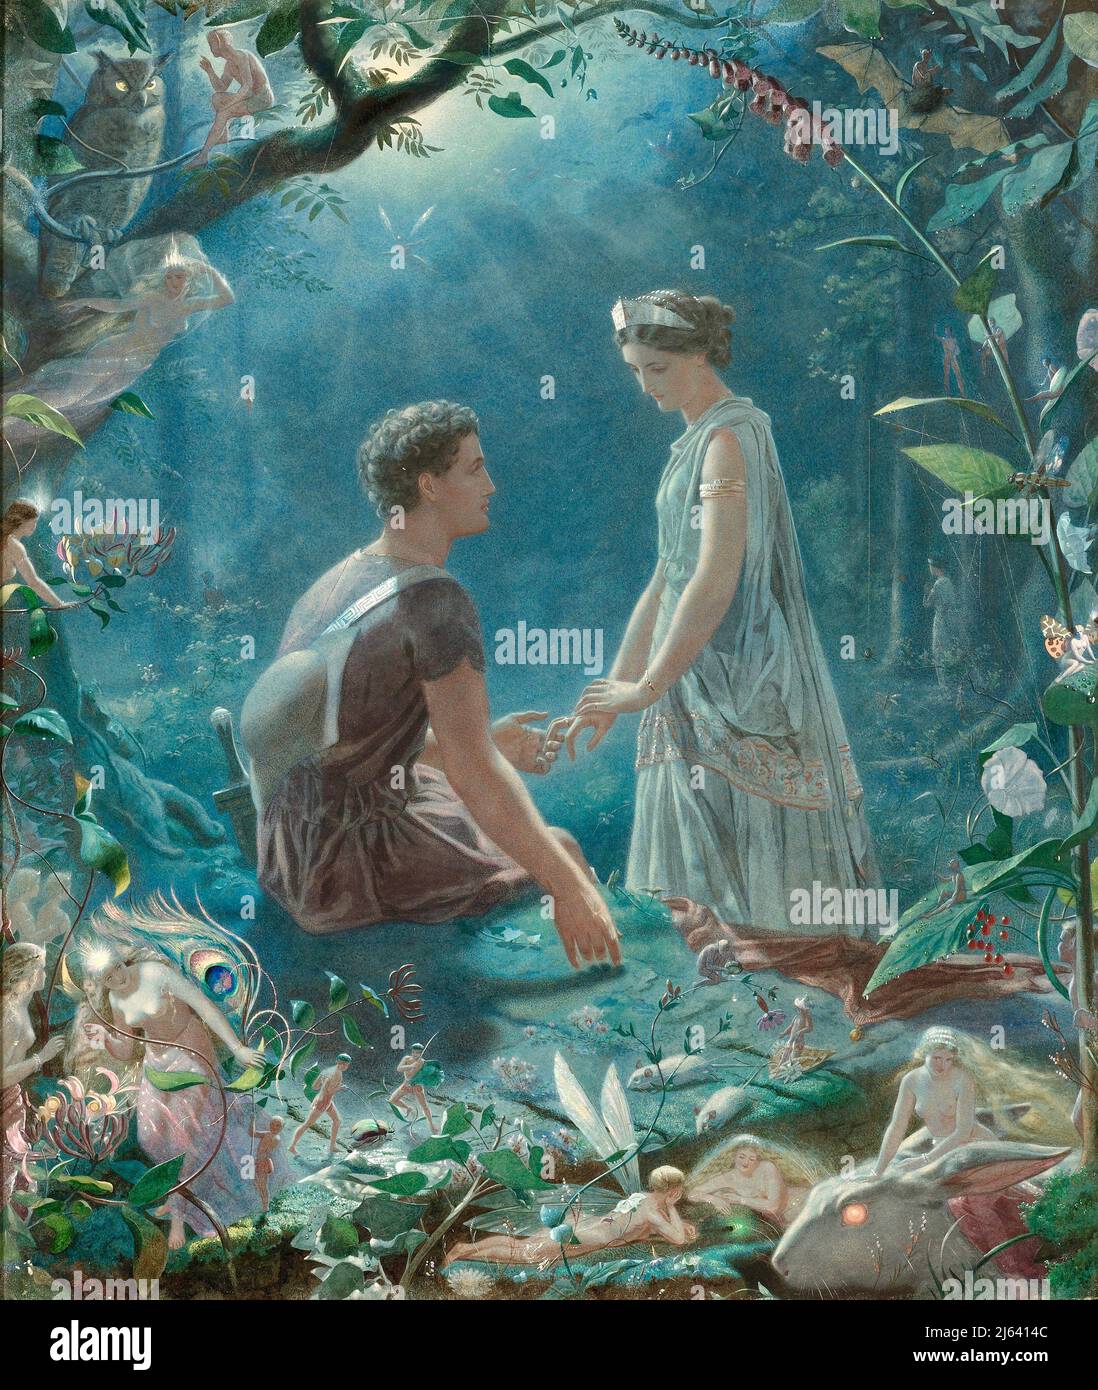 John Simmons - Hermia and Lysander from A Midsummer Night's Dream by William Shakespeare - 1870 Stock Photo